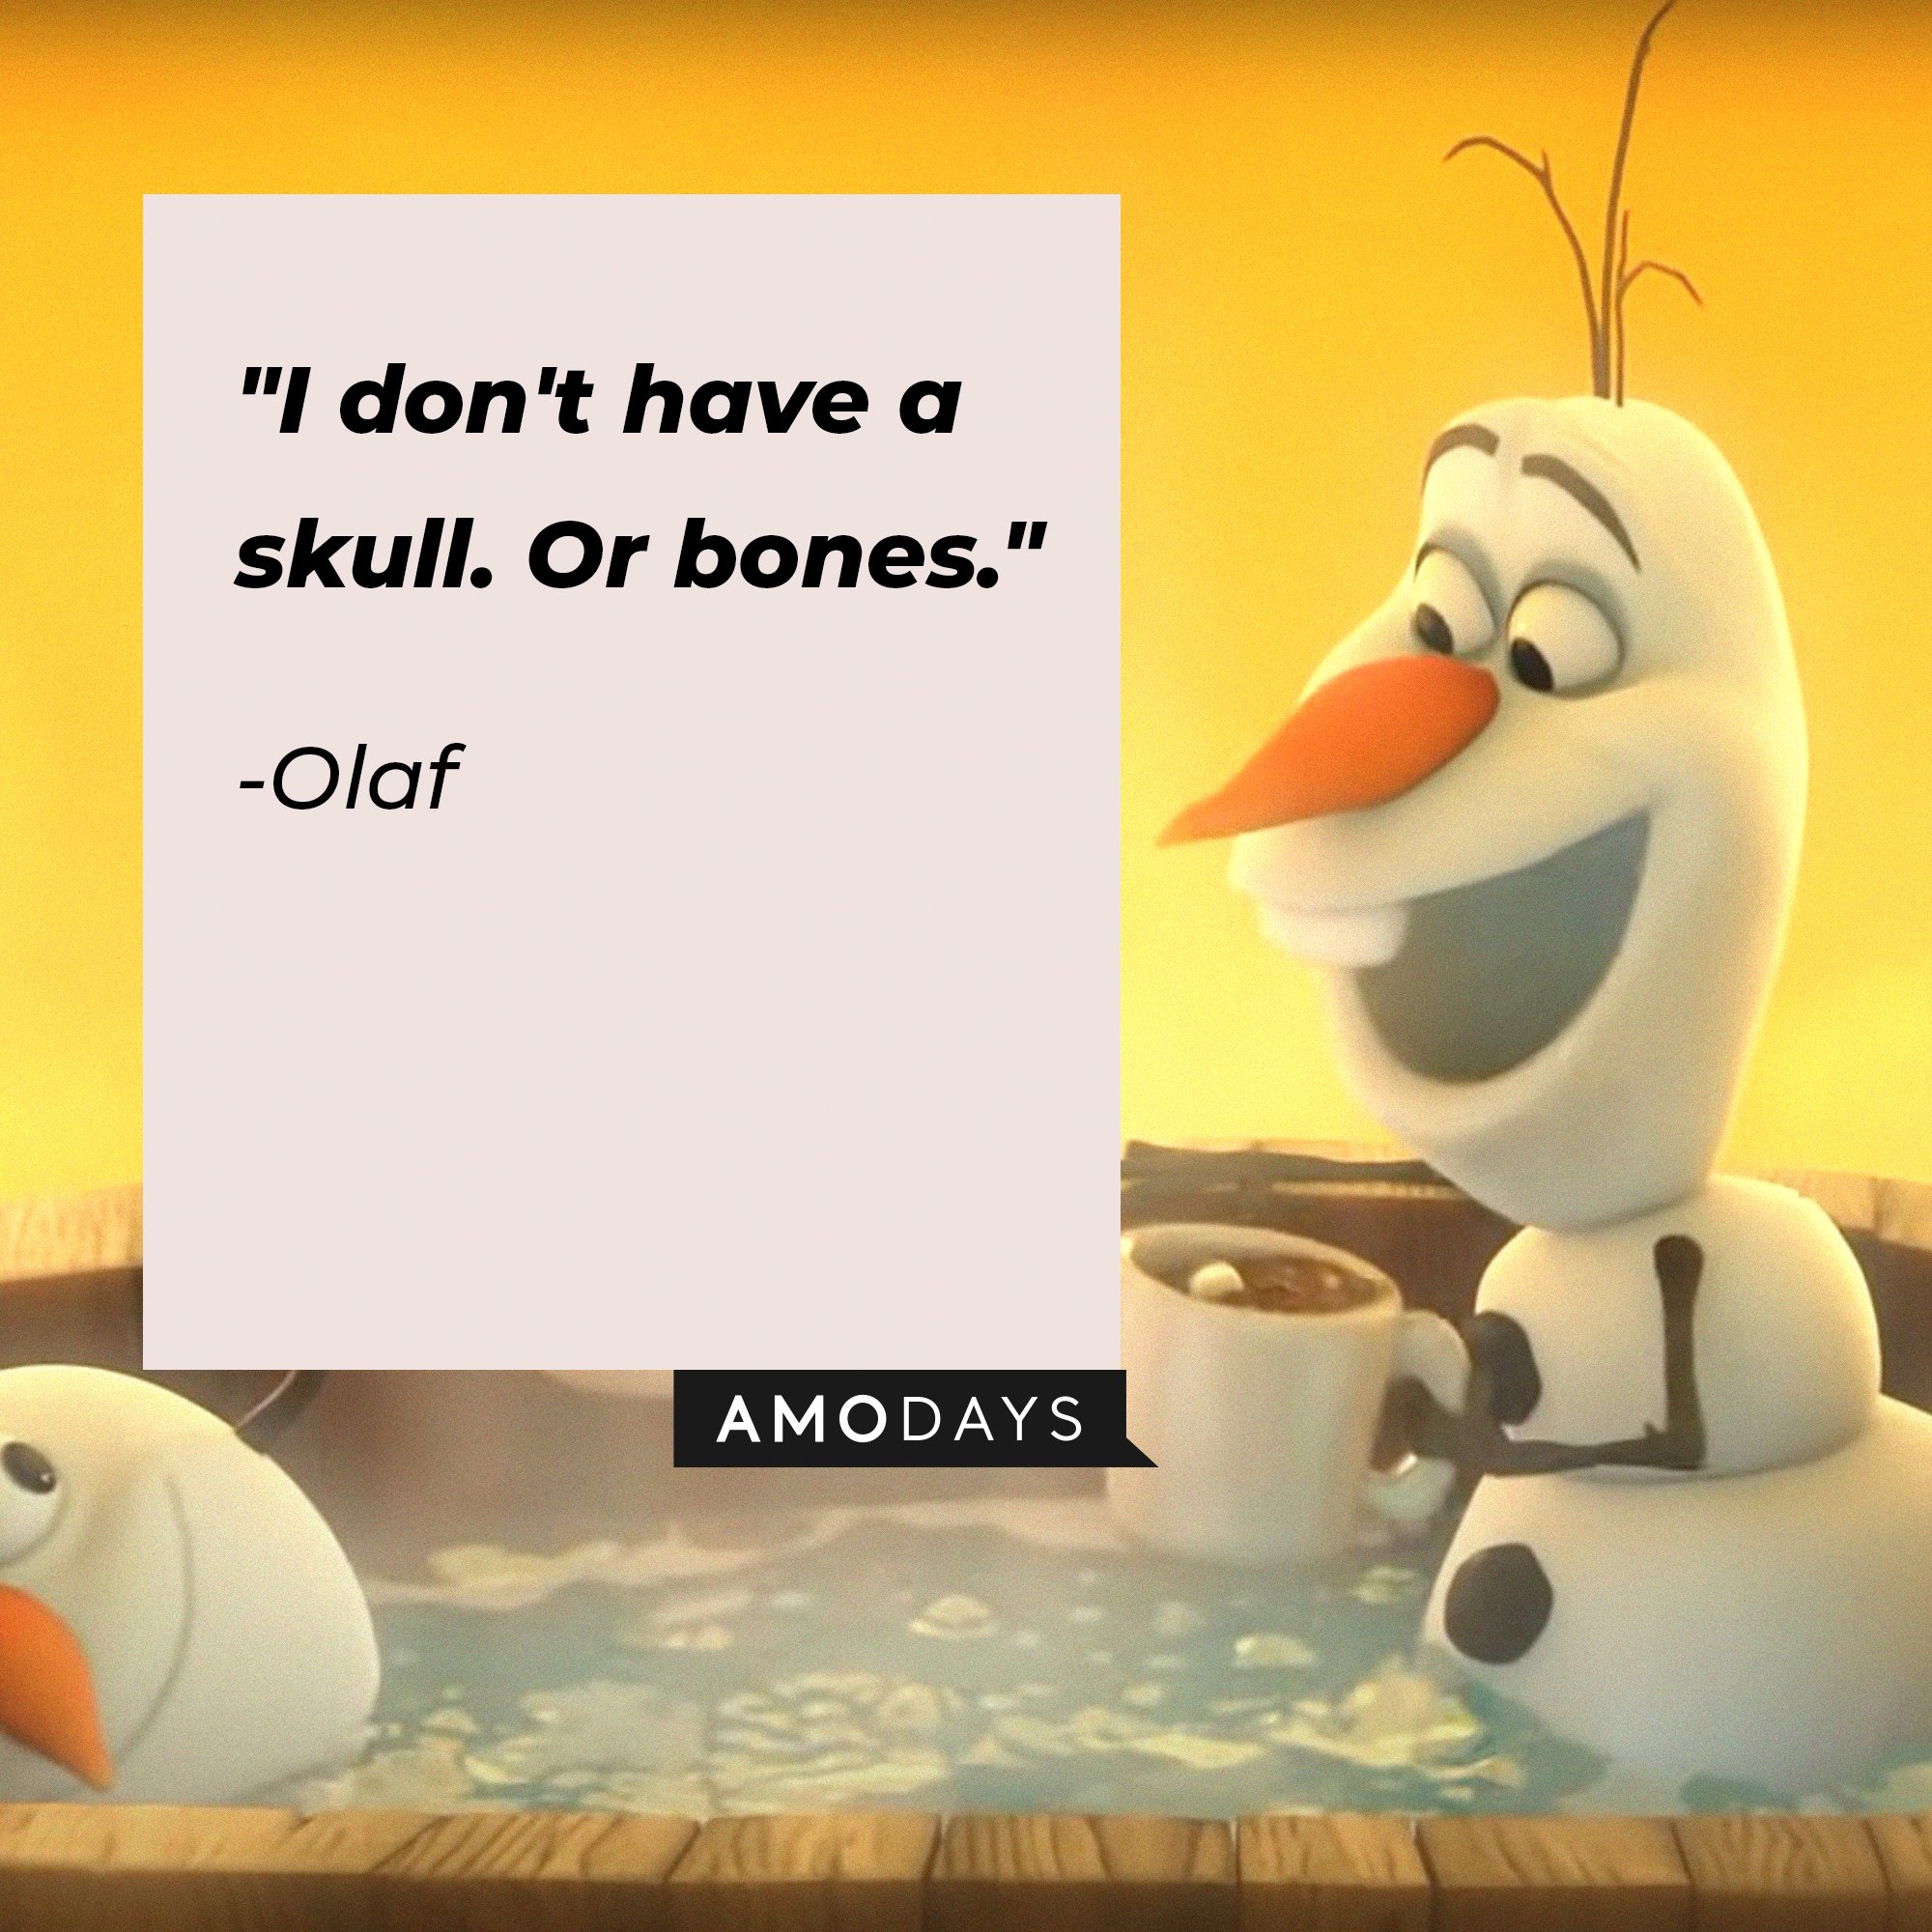 Olaf’s quote: "I don't have a skull. Or bones." | Image: AmoDays